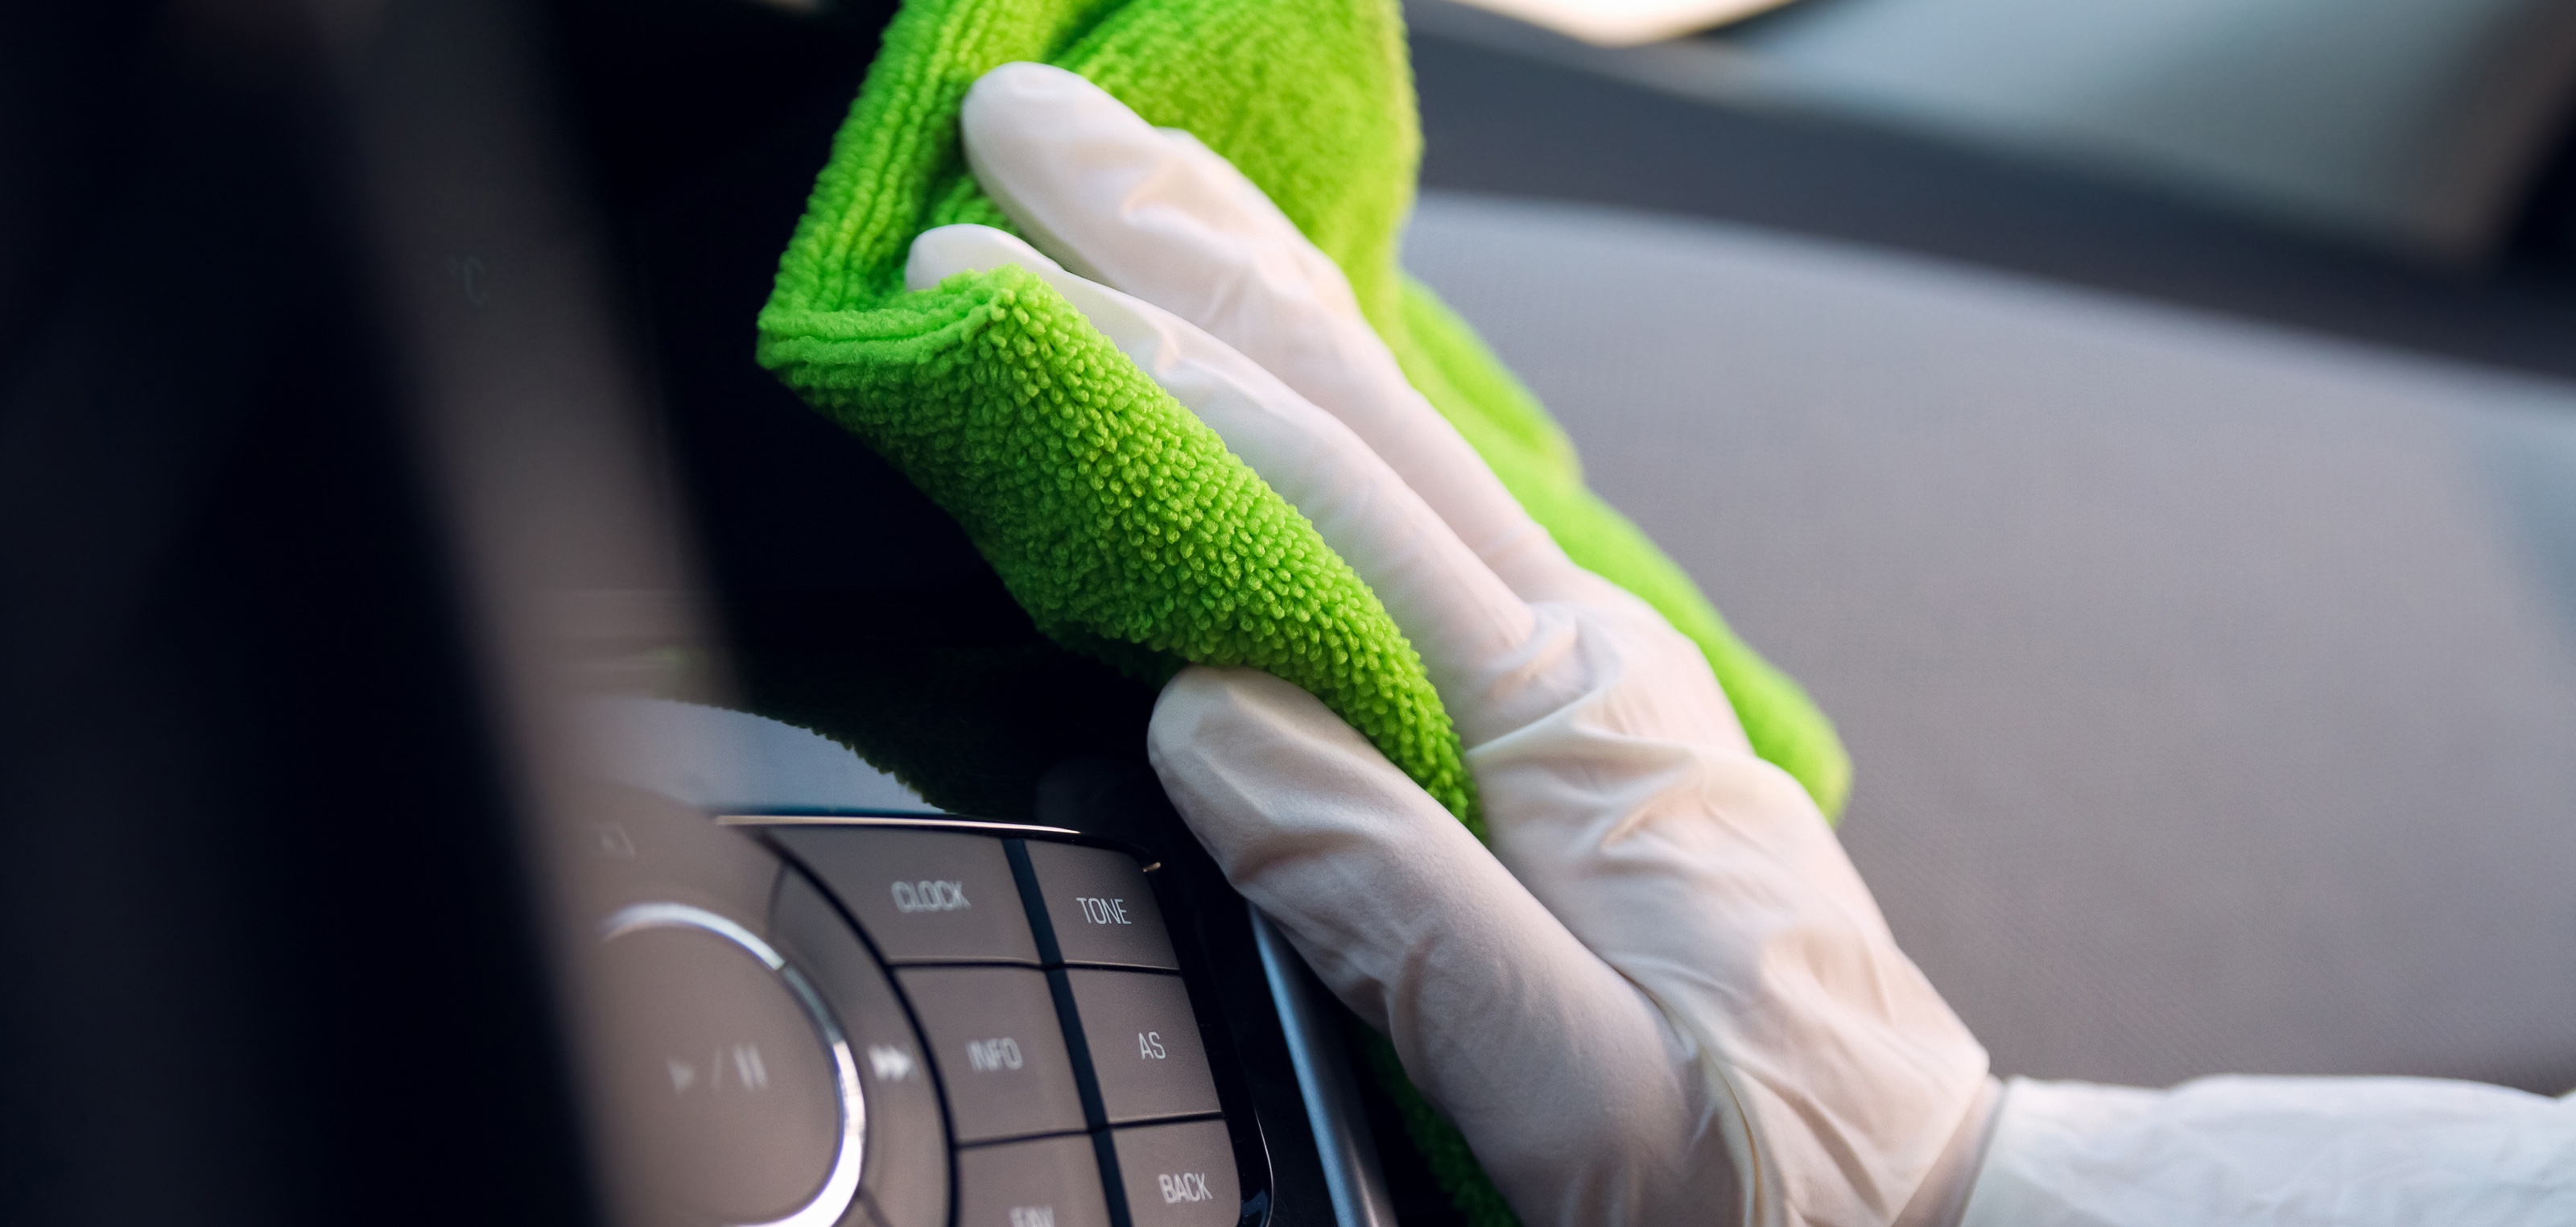 professional cleaning results everywhere, from the dashboard to the glass and windshield.